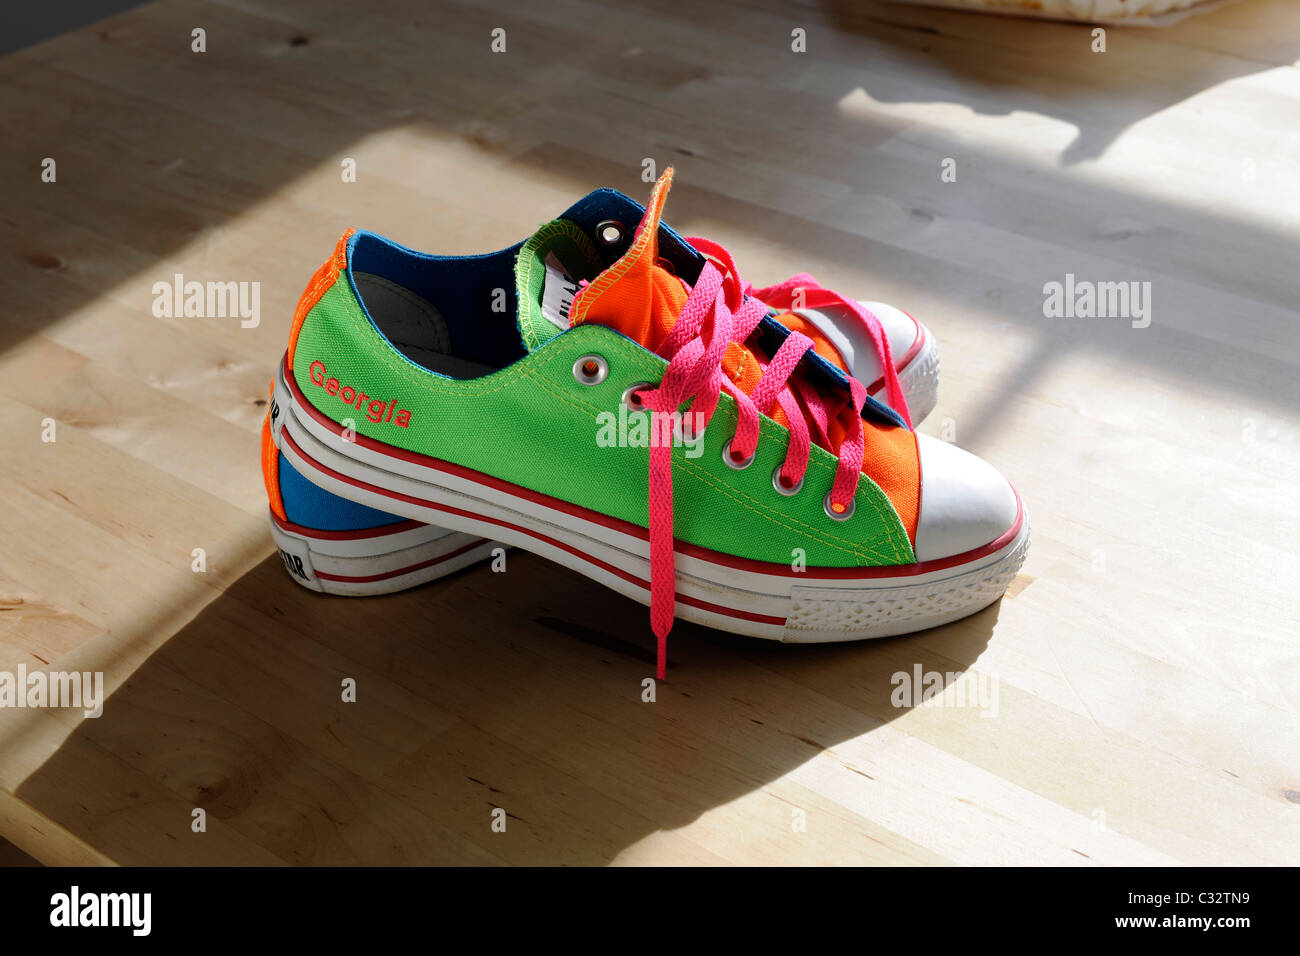 New Converse All Star sneakers ordered from website where user picks what colors to combine. Stock Photo